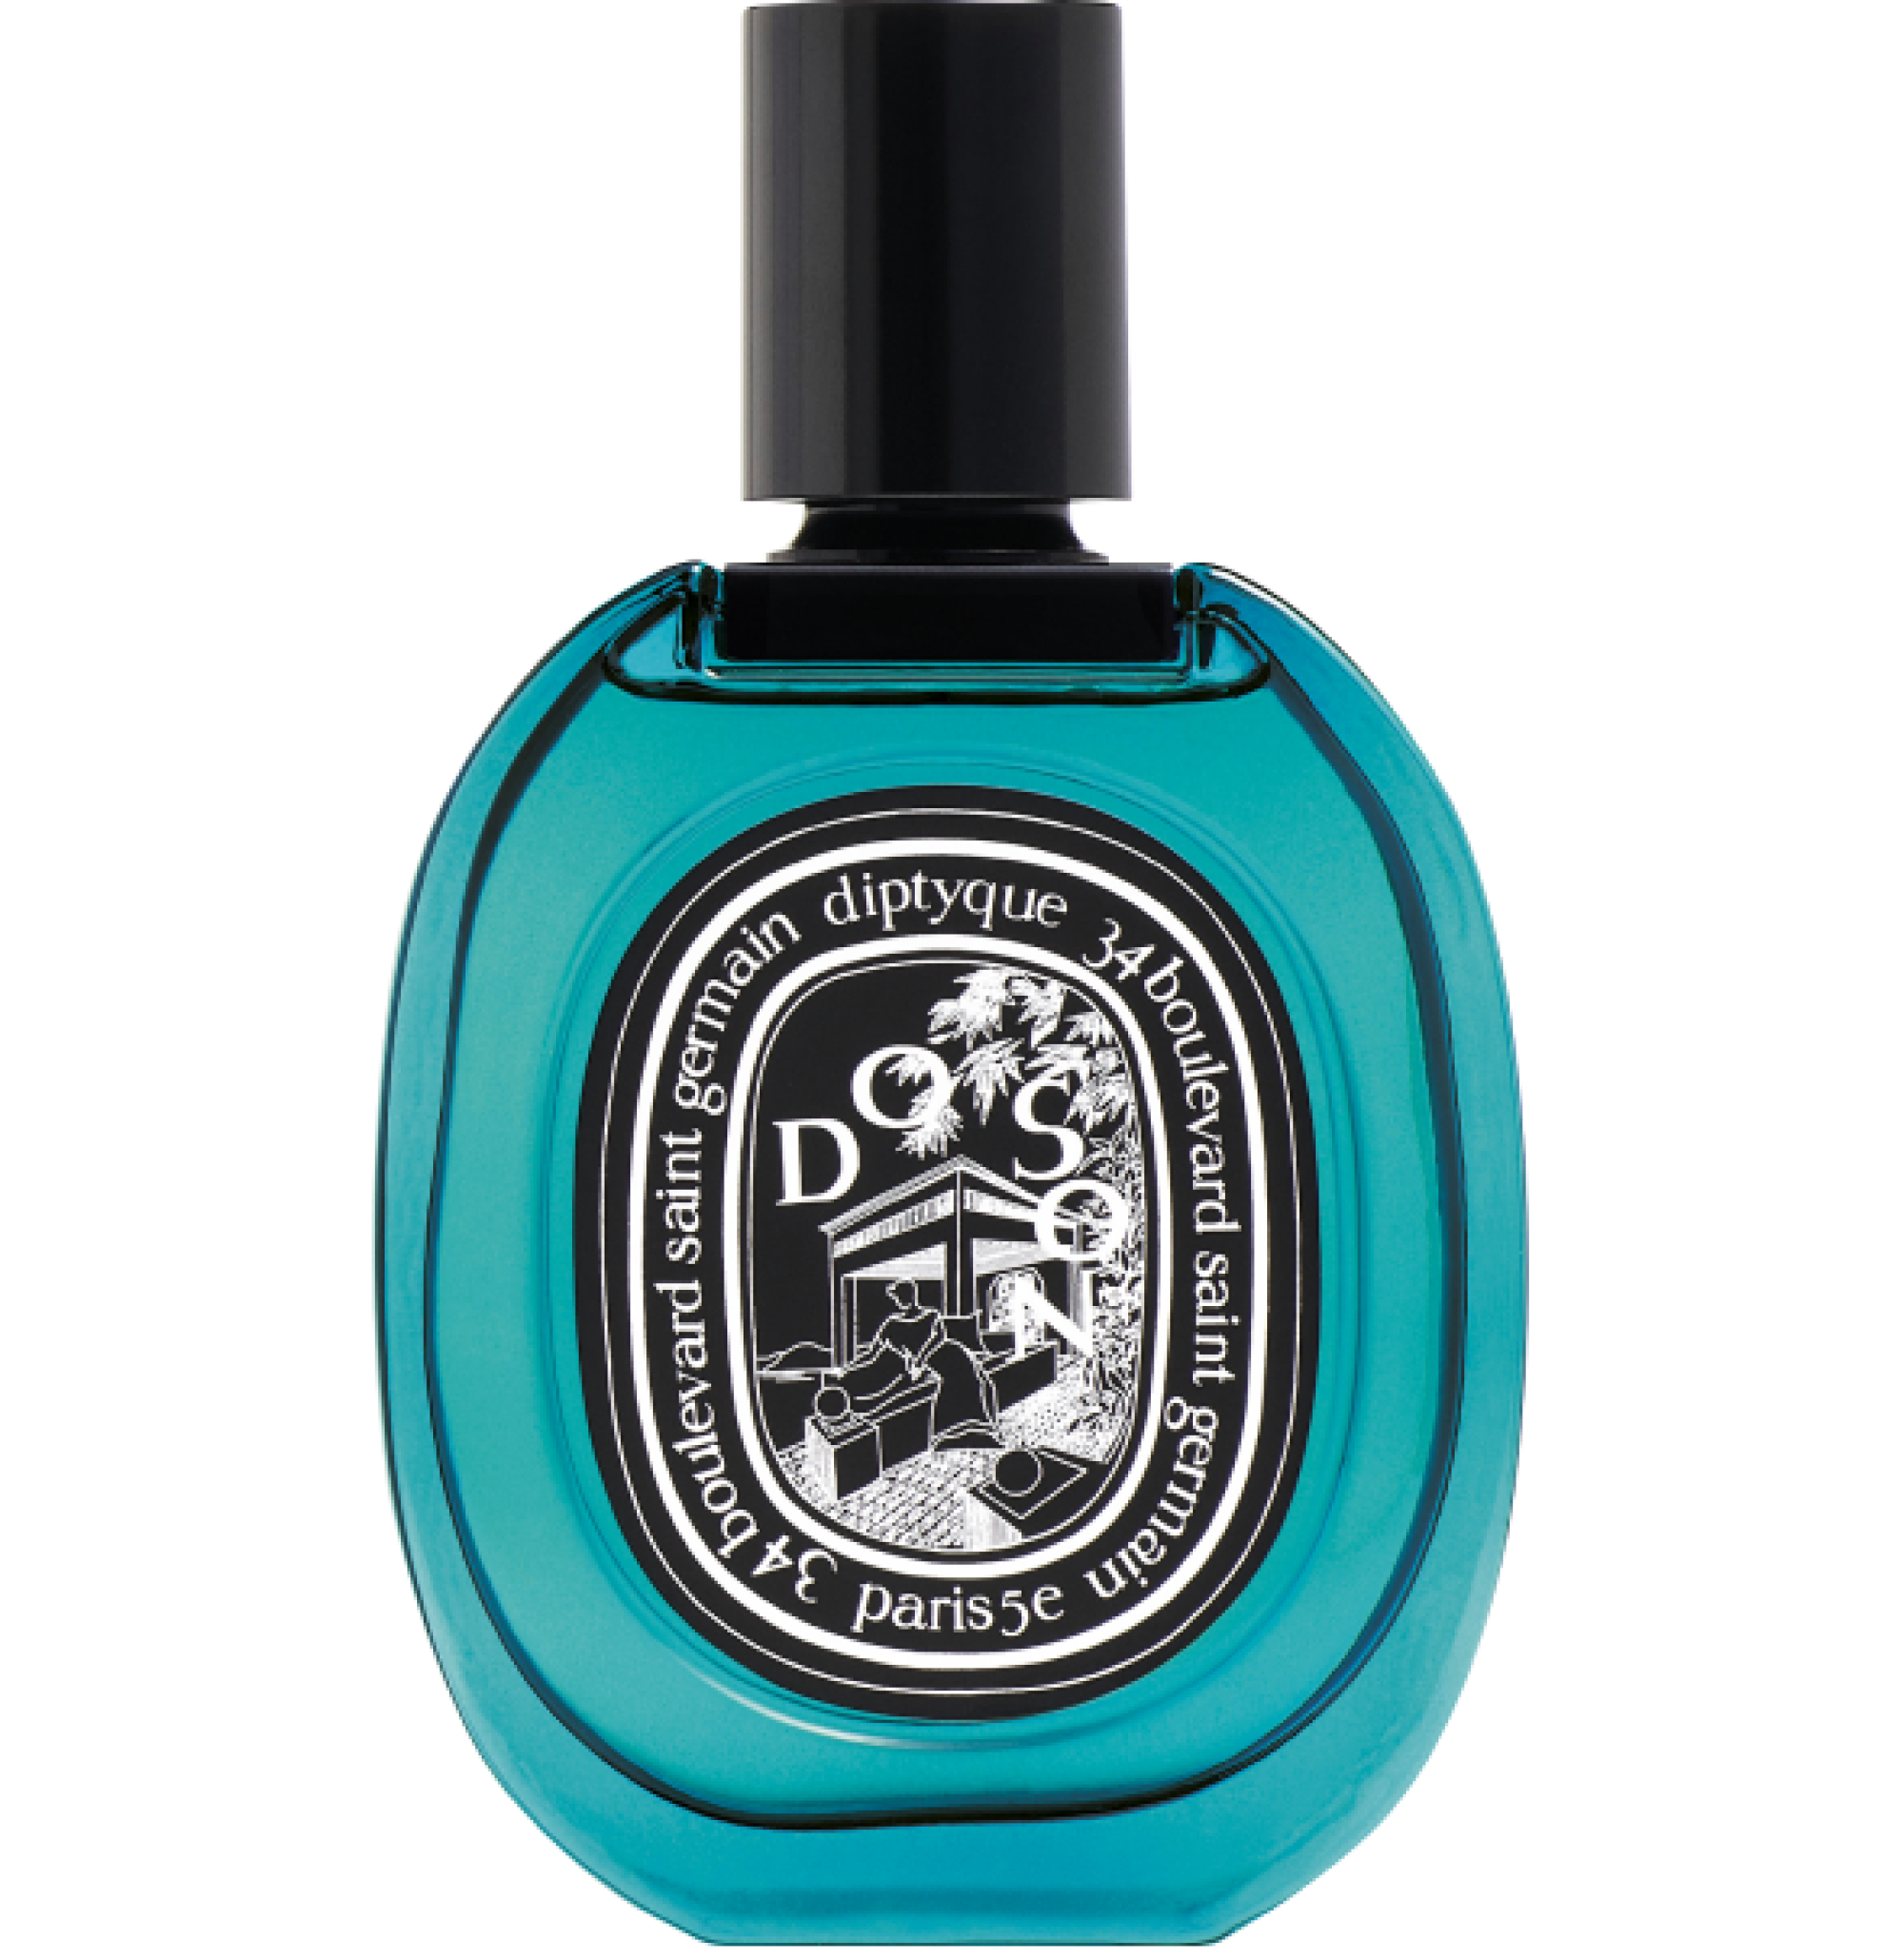 A round blue Diptyque perfume bottle with a black label that reads ”Do Son” with the Paris address of Diptyque